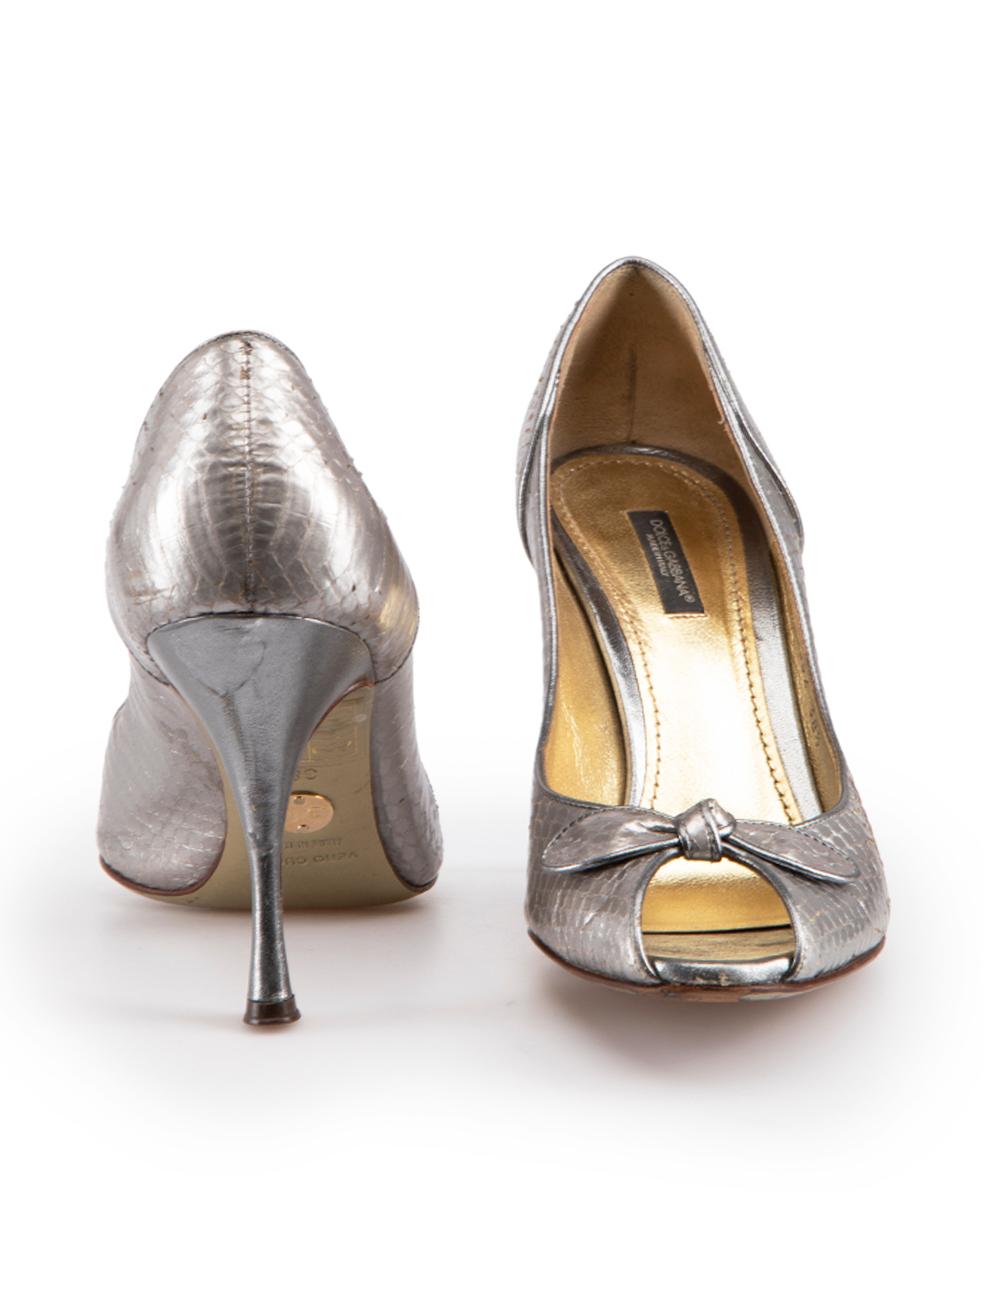 Dolce & Gabbana Silver Python Peep Toe Heels Size IT 38.5 In Good Condition For Sale In London, GB